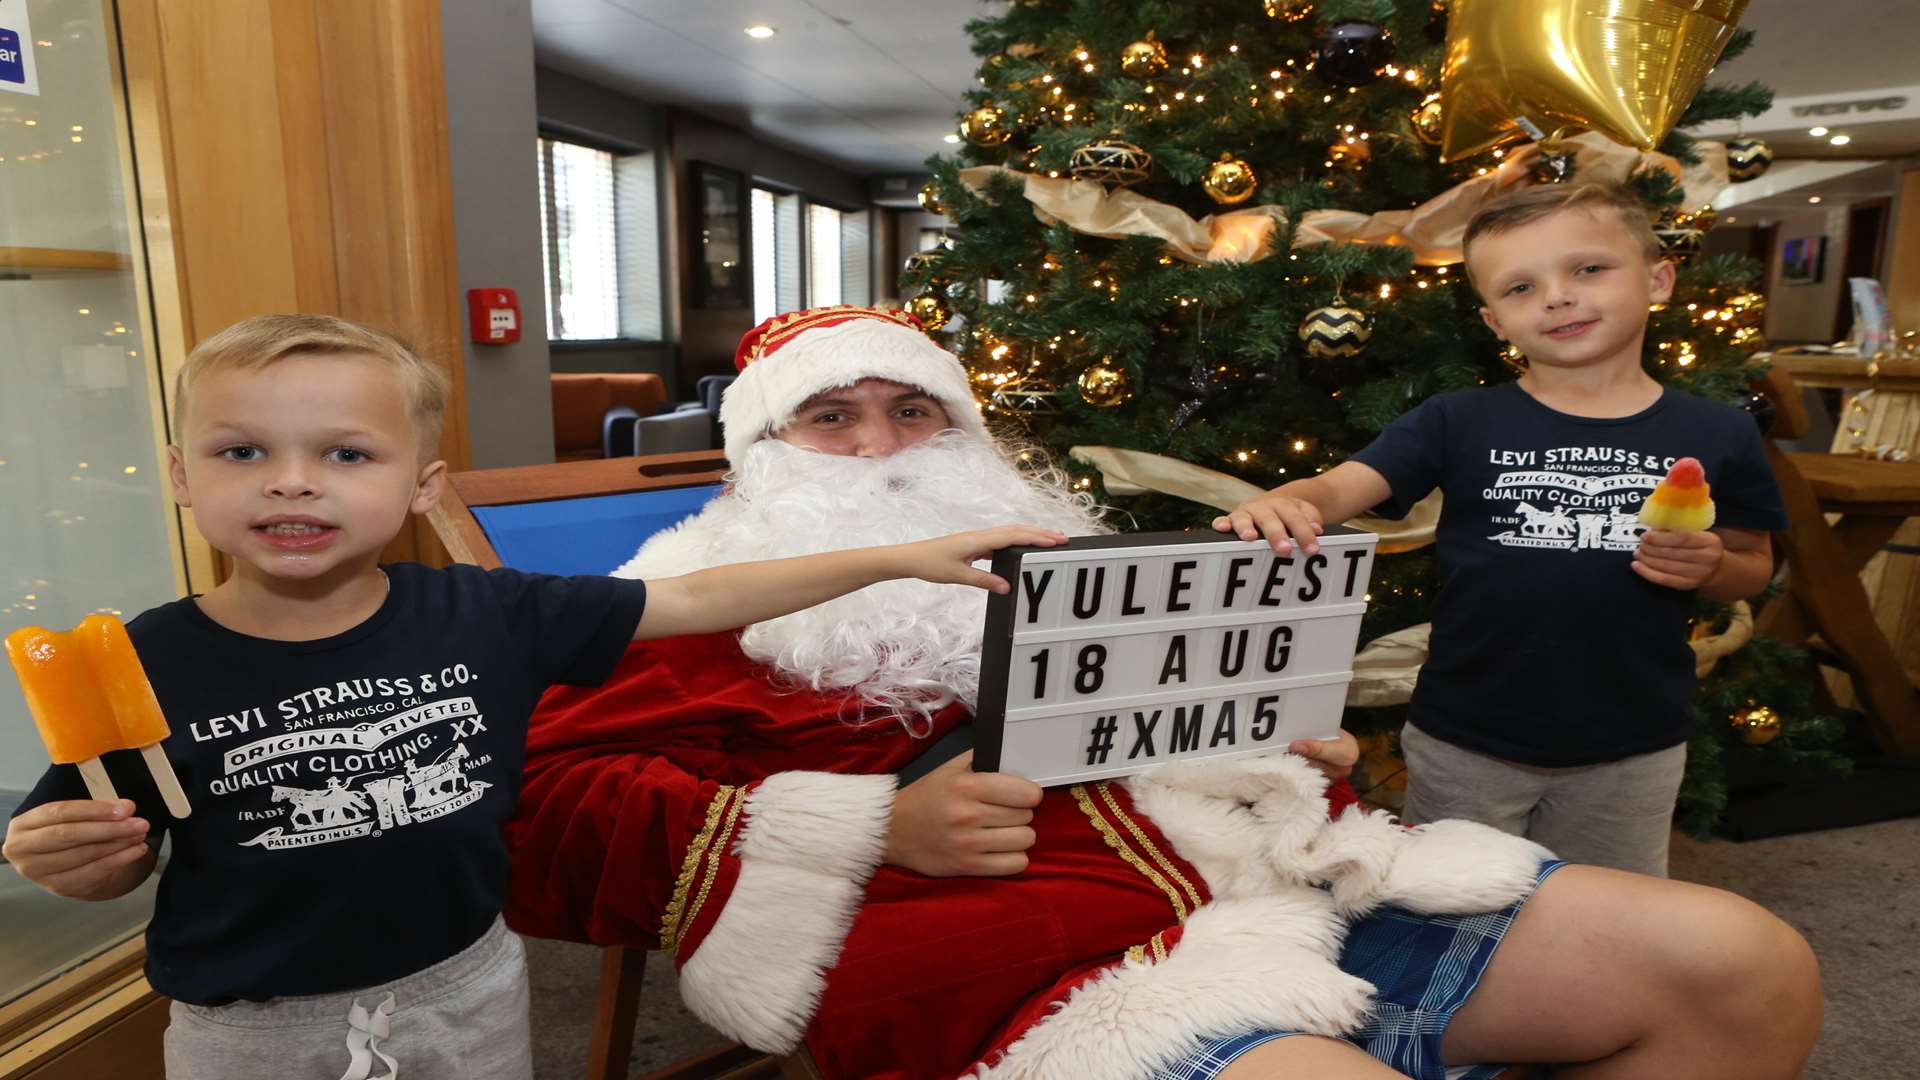 Ben Hughes, dressed as Santa, poses with John Smith, four, and his brother, Rocky, five, at The Village Hotel's Yule Fest during the launch of their Christmas parties